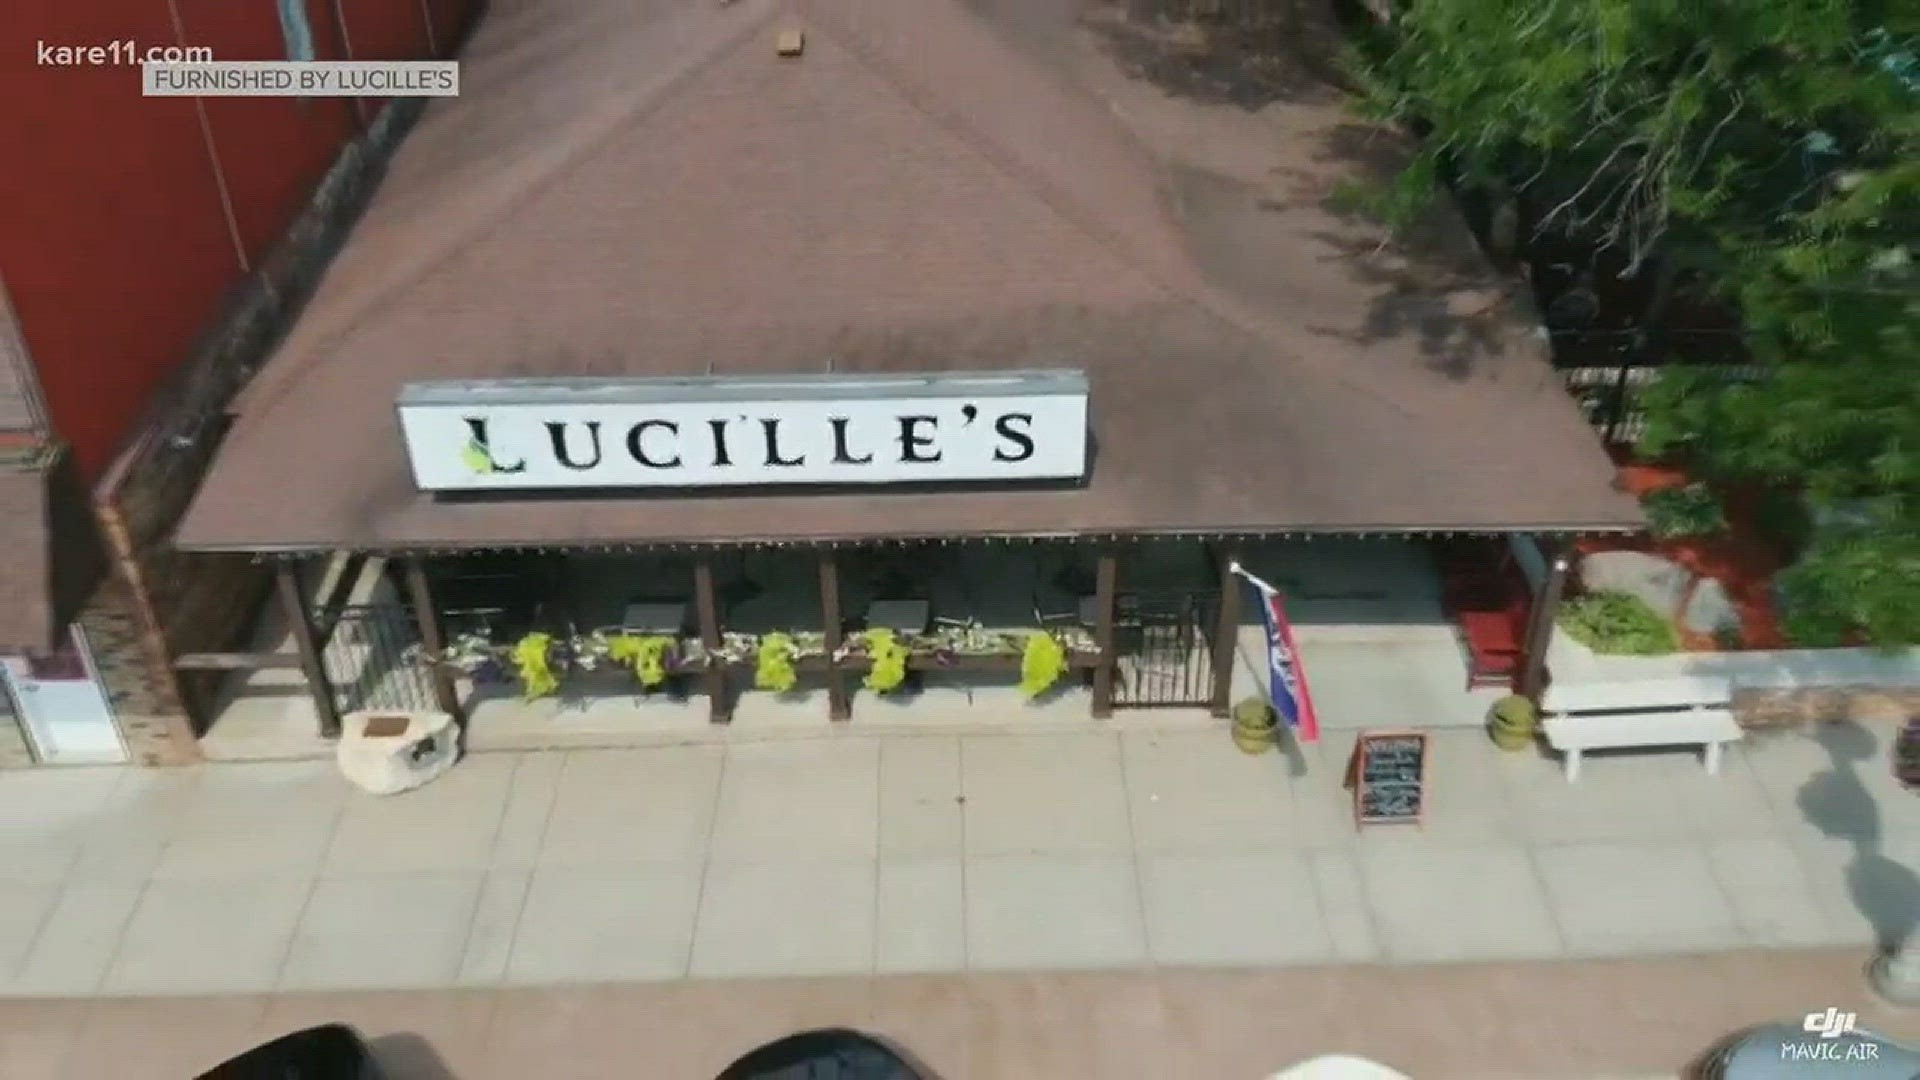 Lucille's, which opened in April in Prescott, Wisconsin, joined KARE 11 Saturday to showcase their Pasta Lucille. https://kare11.tv/2D4JwUd